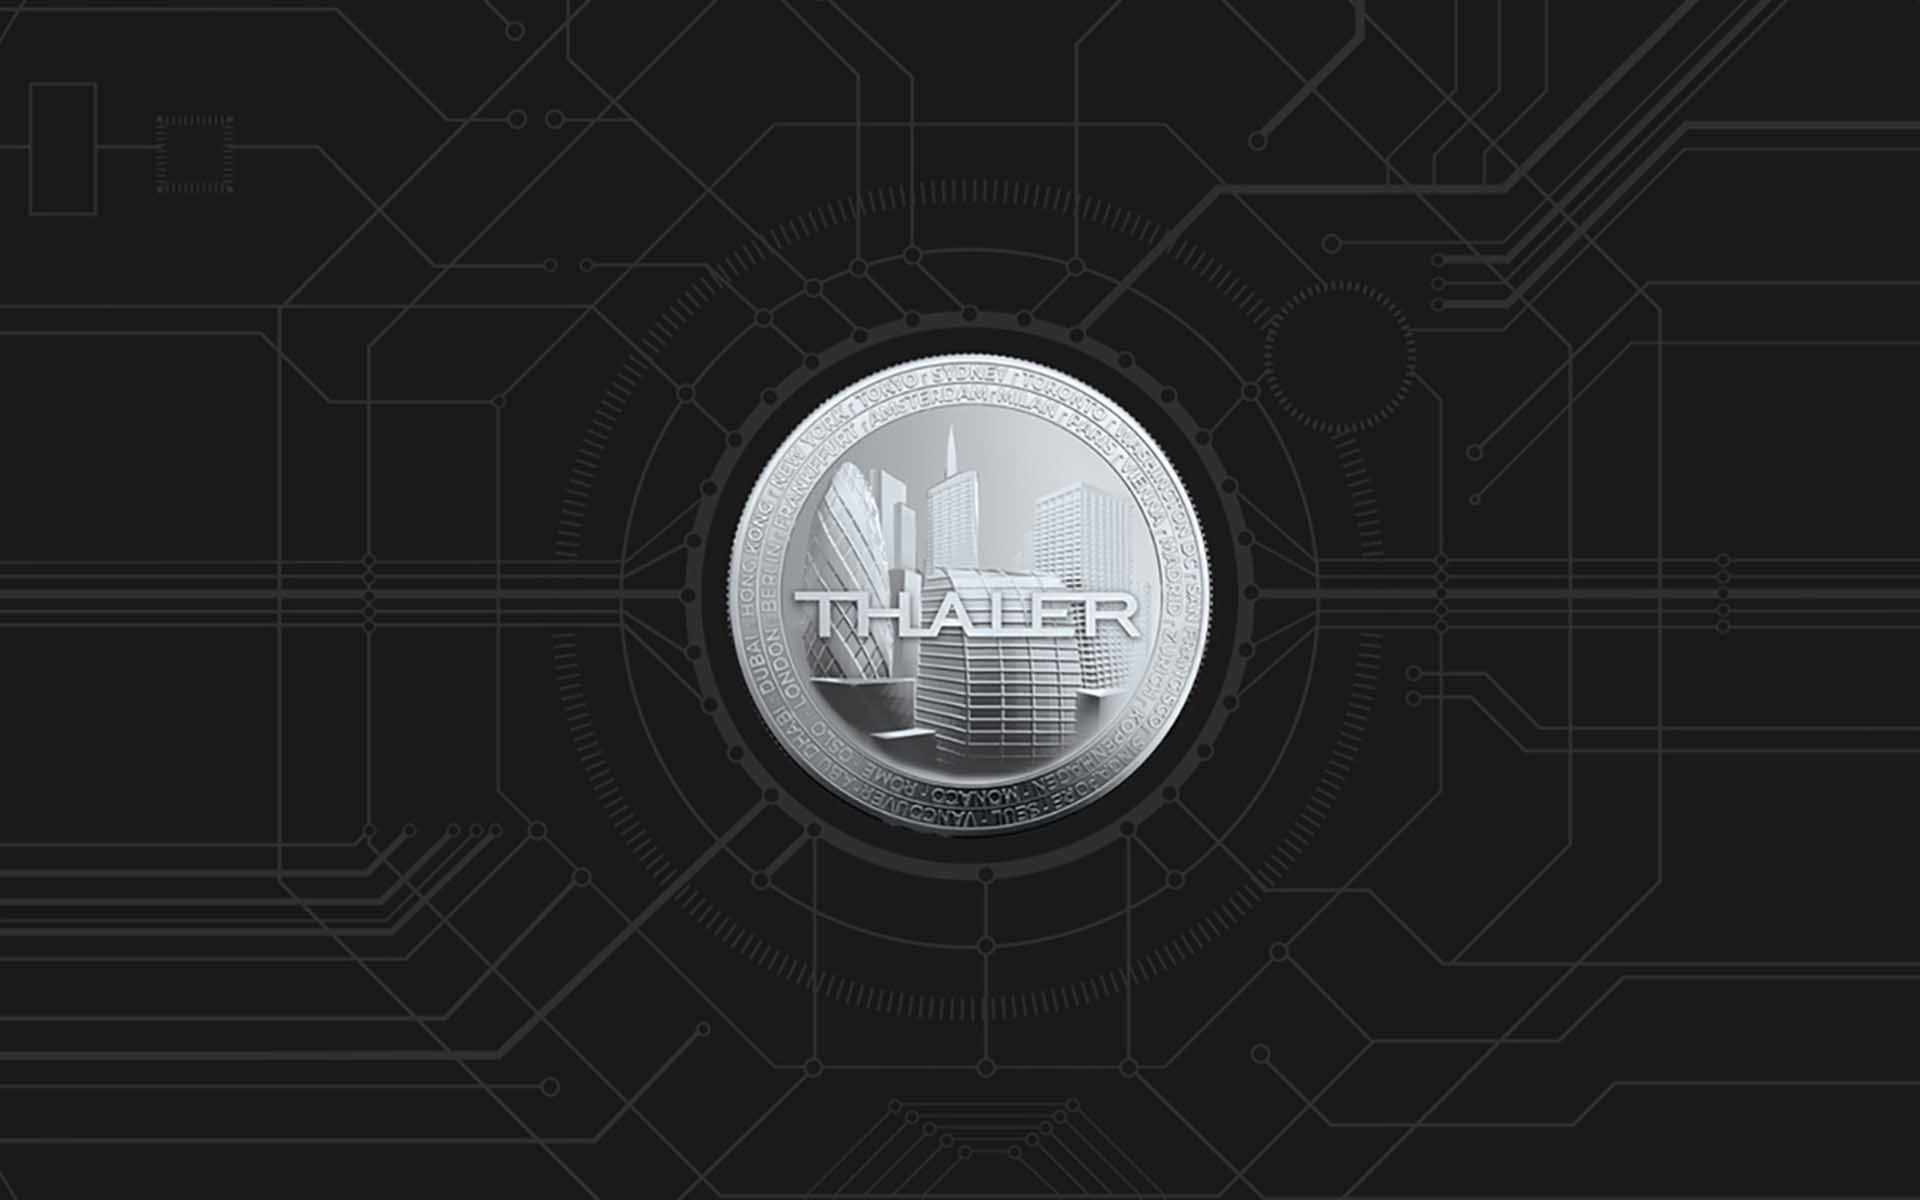 Thaler.One Brings Blockchain Benefits to Transform Real Estate Investing Zurich Based Thaler.One to Issue Security Tokens